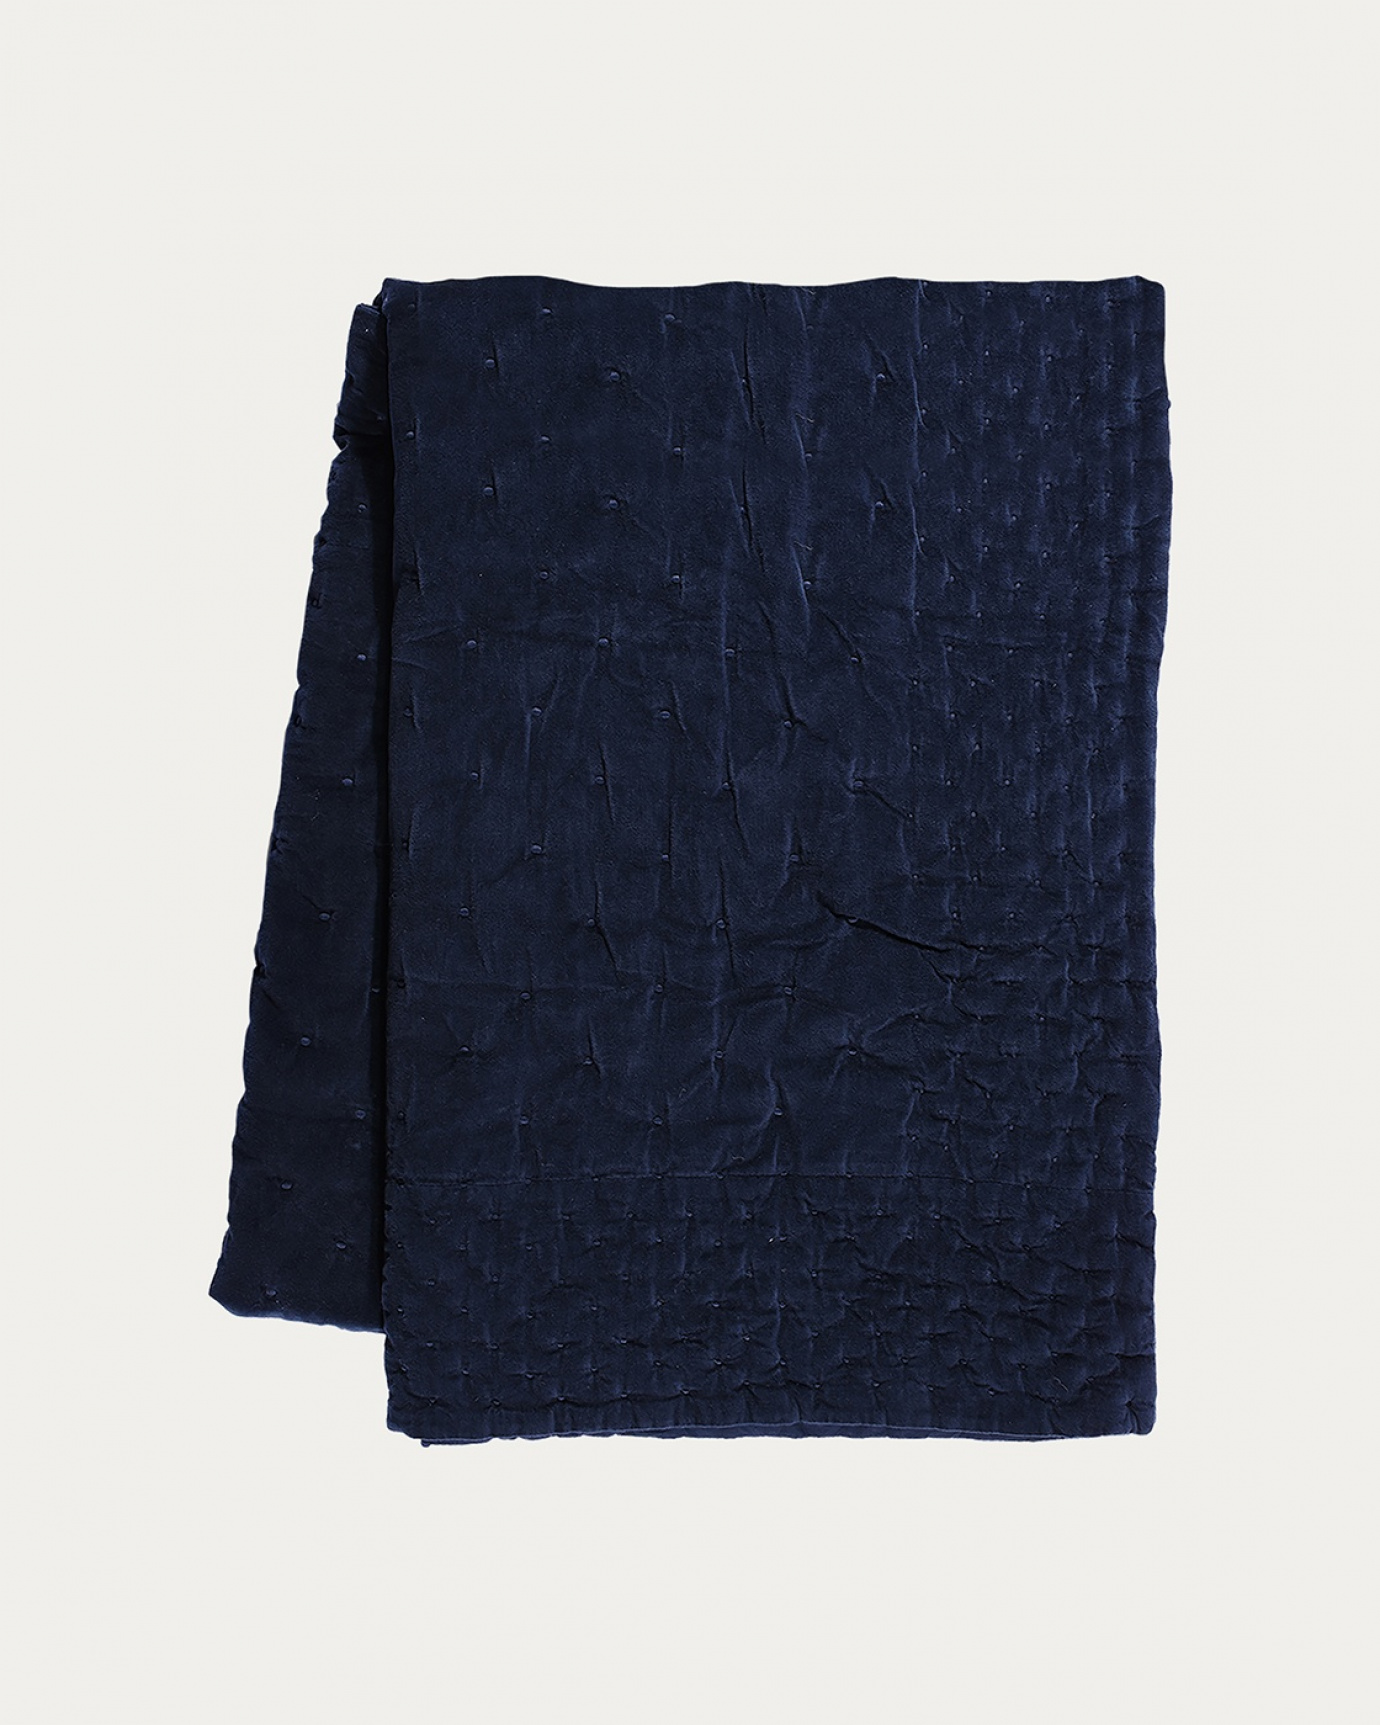 Product image ink blue PAOLO bedspread in soft cotton velvet for double bed from LINUM DESIGN. Size 270x260 cm.